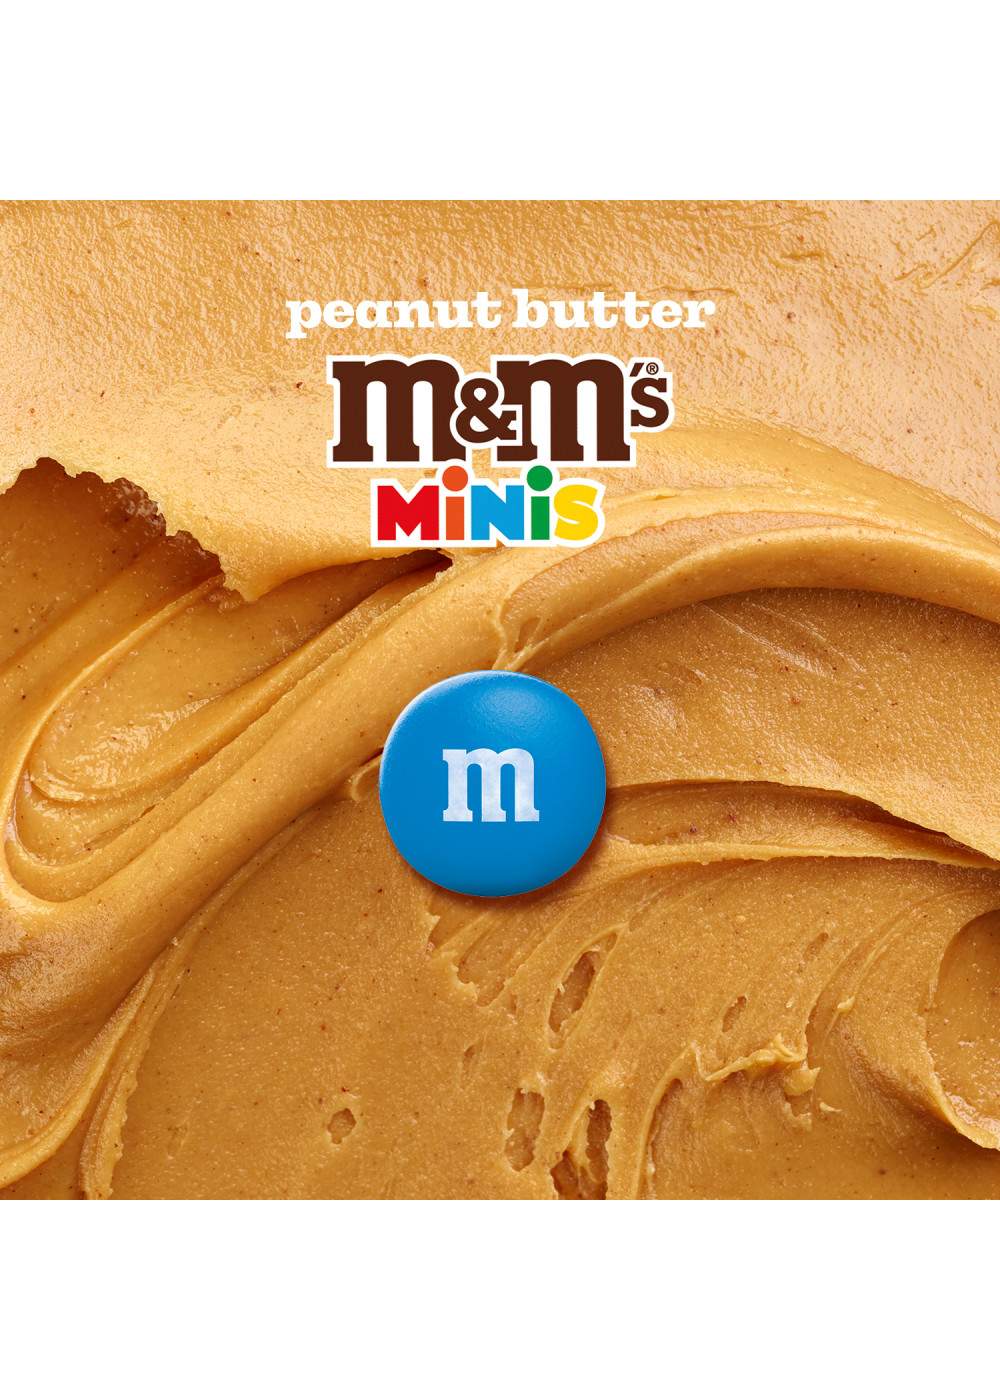 M&M'S Minis Peanut Butter Milk Chocolate Candy - Sharing Size; image 6 of 8